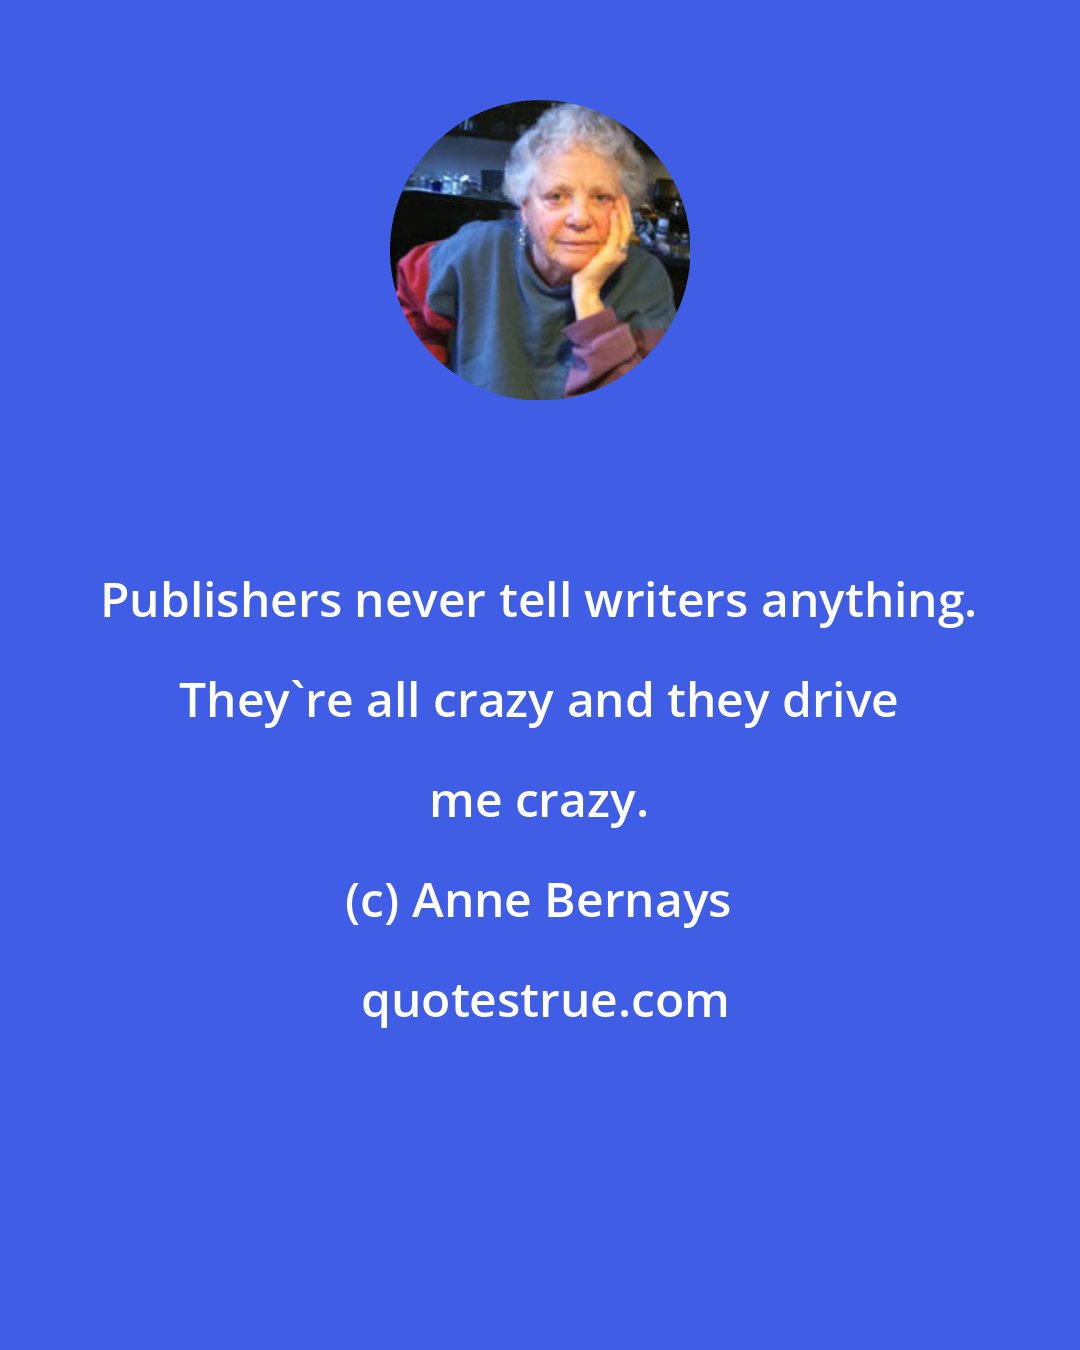 Anne Bernays: Publishers never tell writers anything. They're all crazy and they drive me crazy.